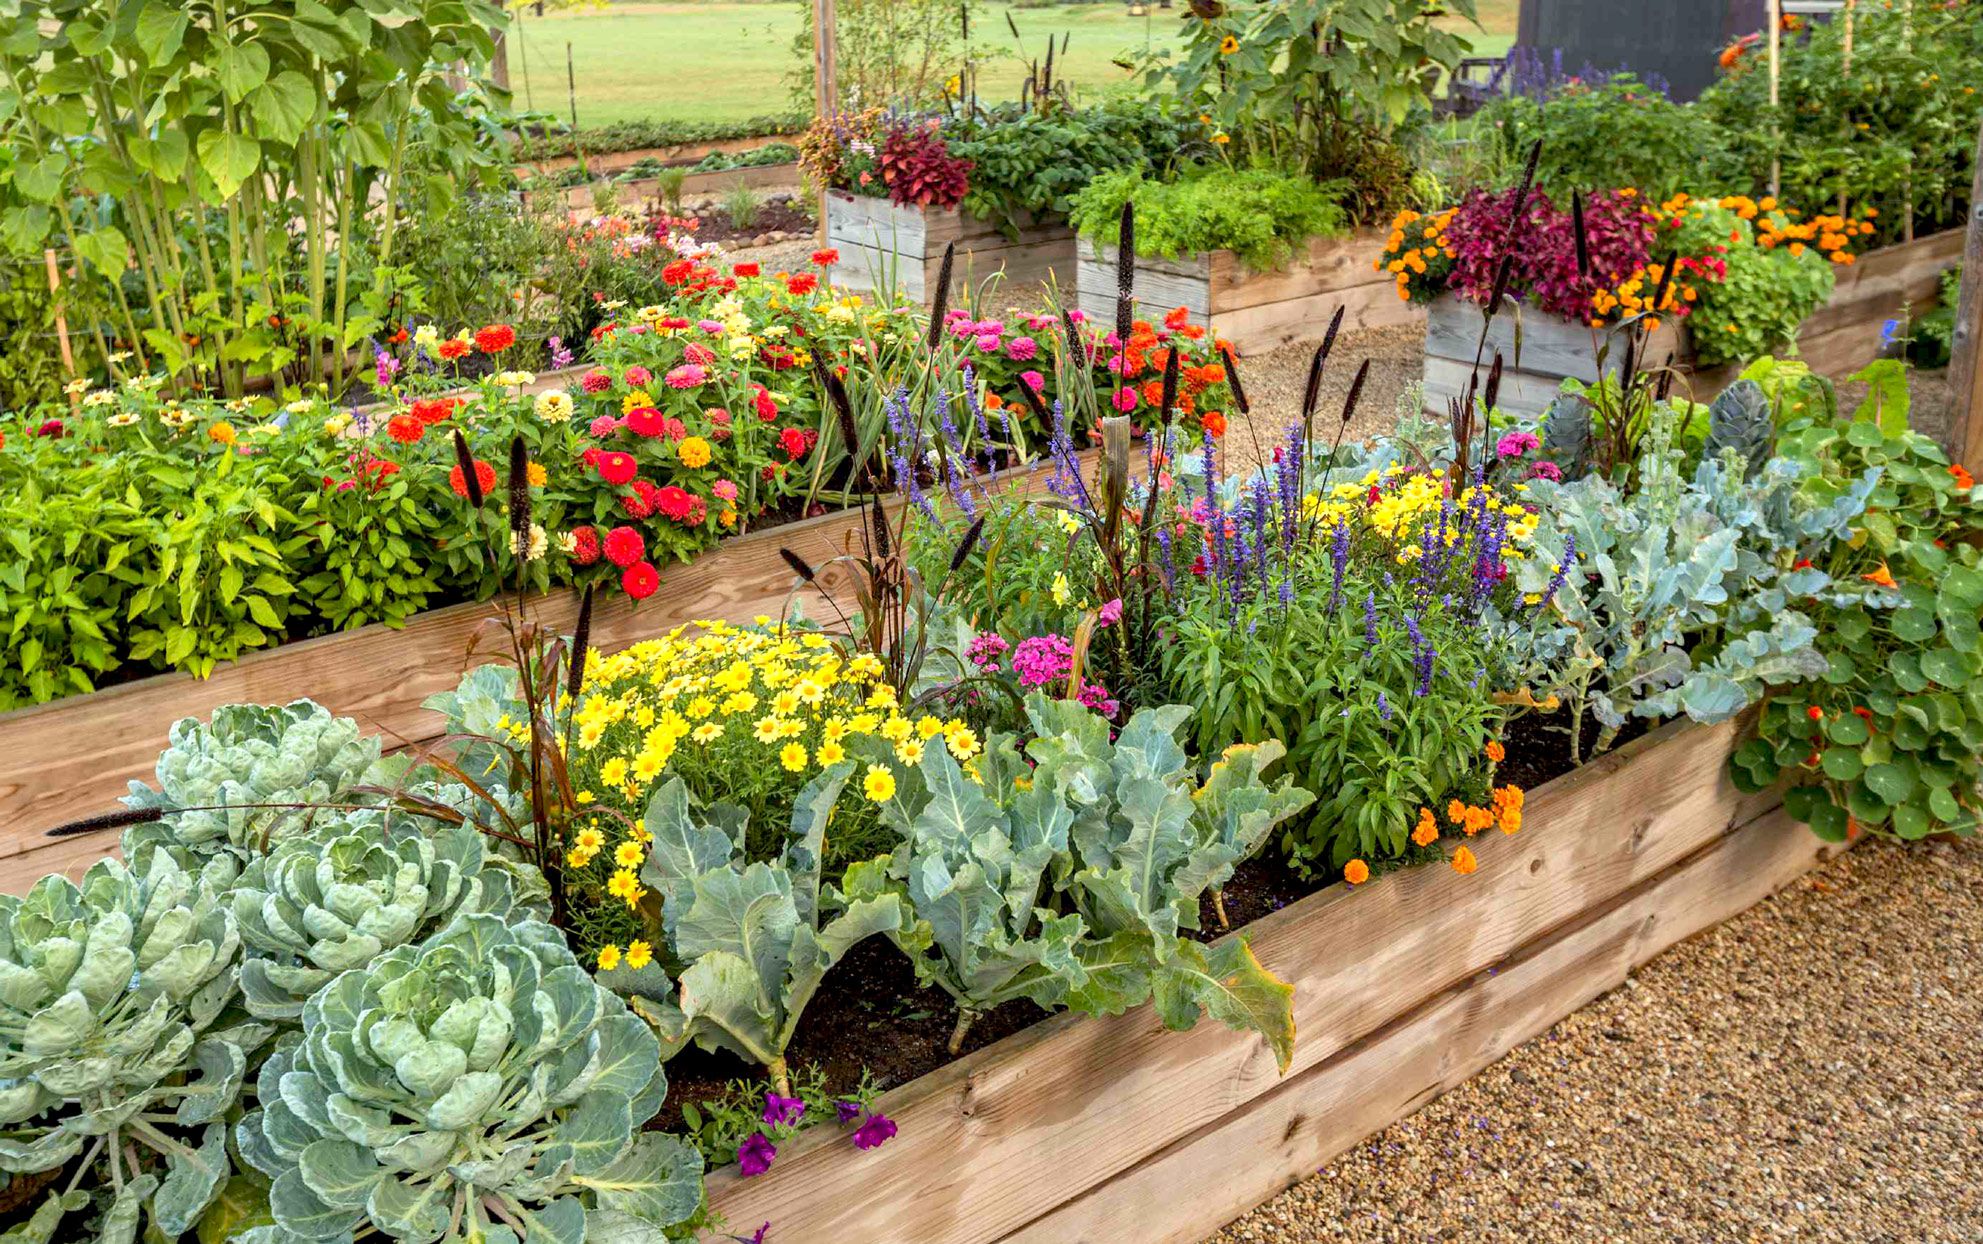 How To Plant Vegetables In Raised Beds